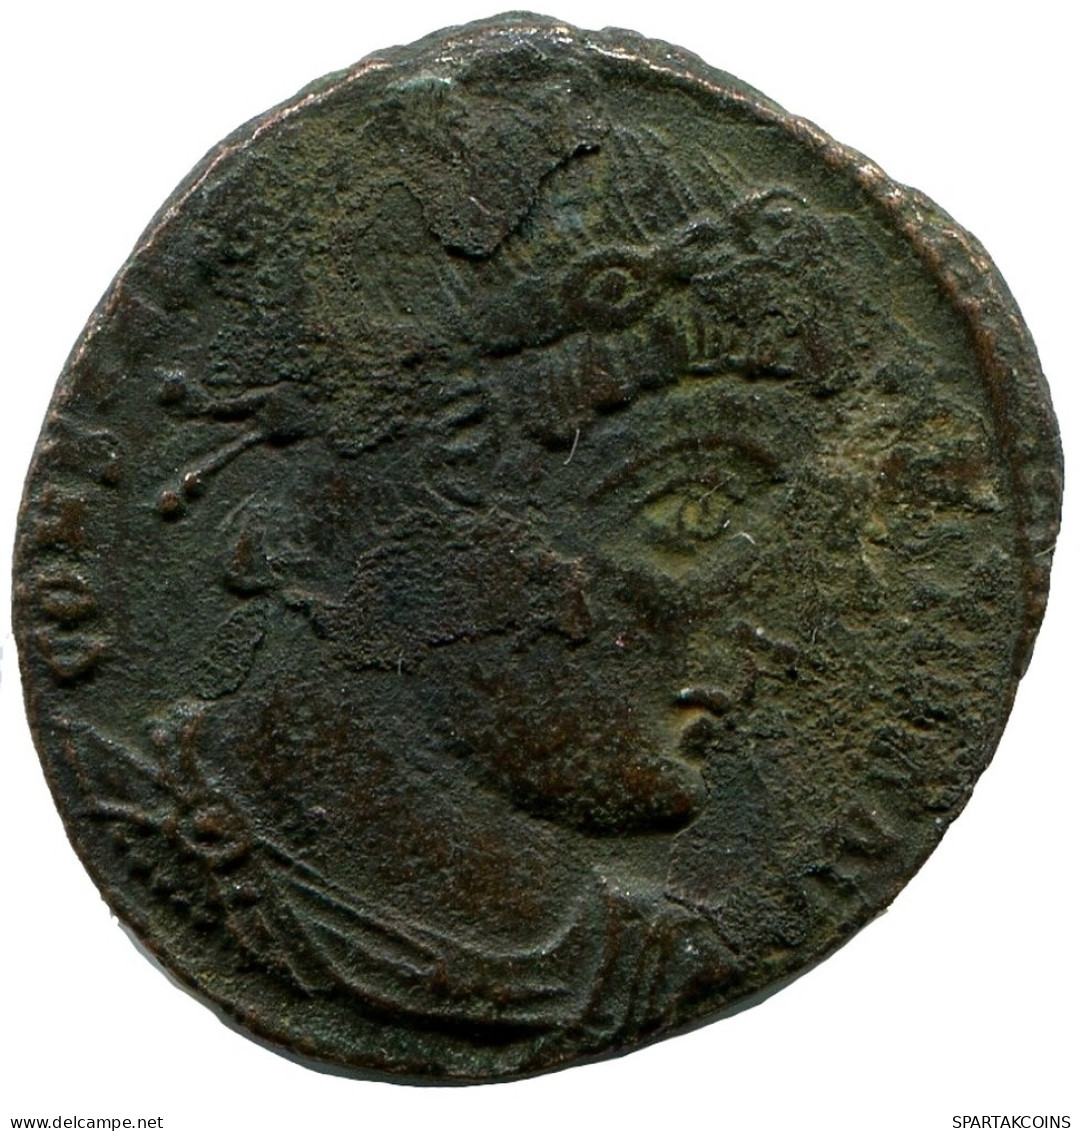 CONSTANTINE I MINTED IN ANTIOCH FOUND IN IHNASYAH HOARD EGYPT #ANC10590.14.E.A - El Impero Christiano (307 / 363)